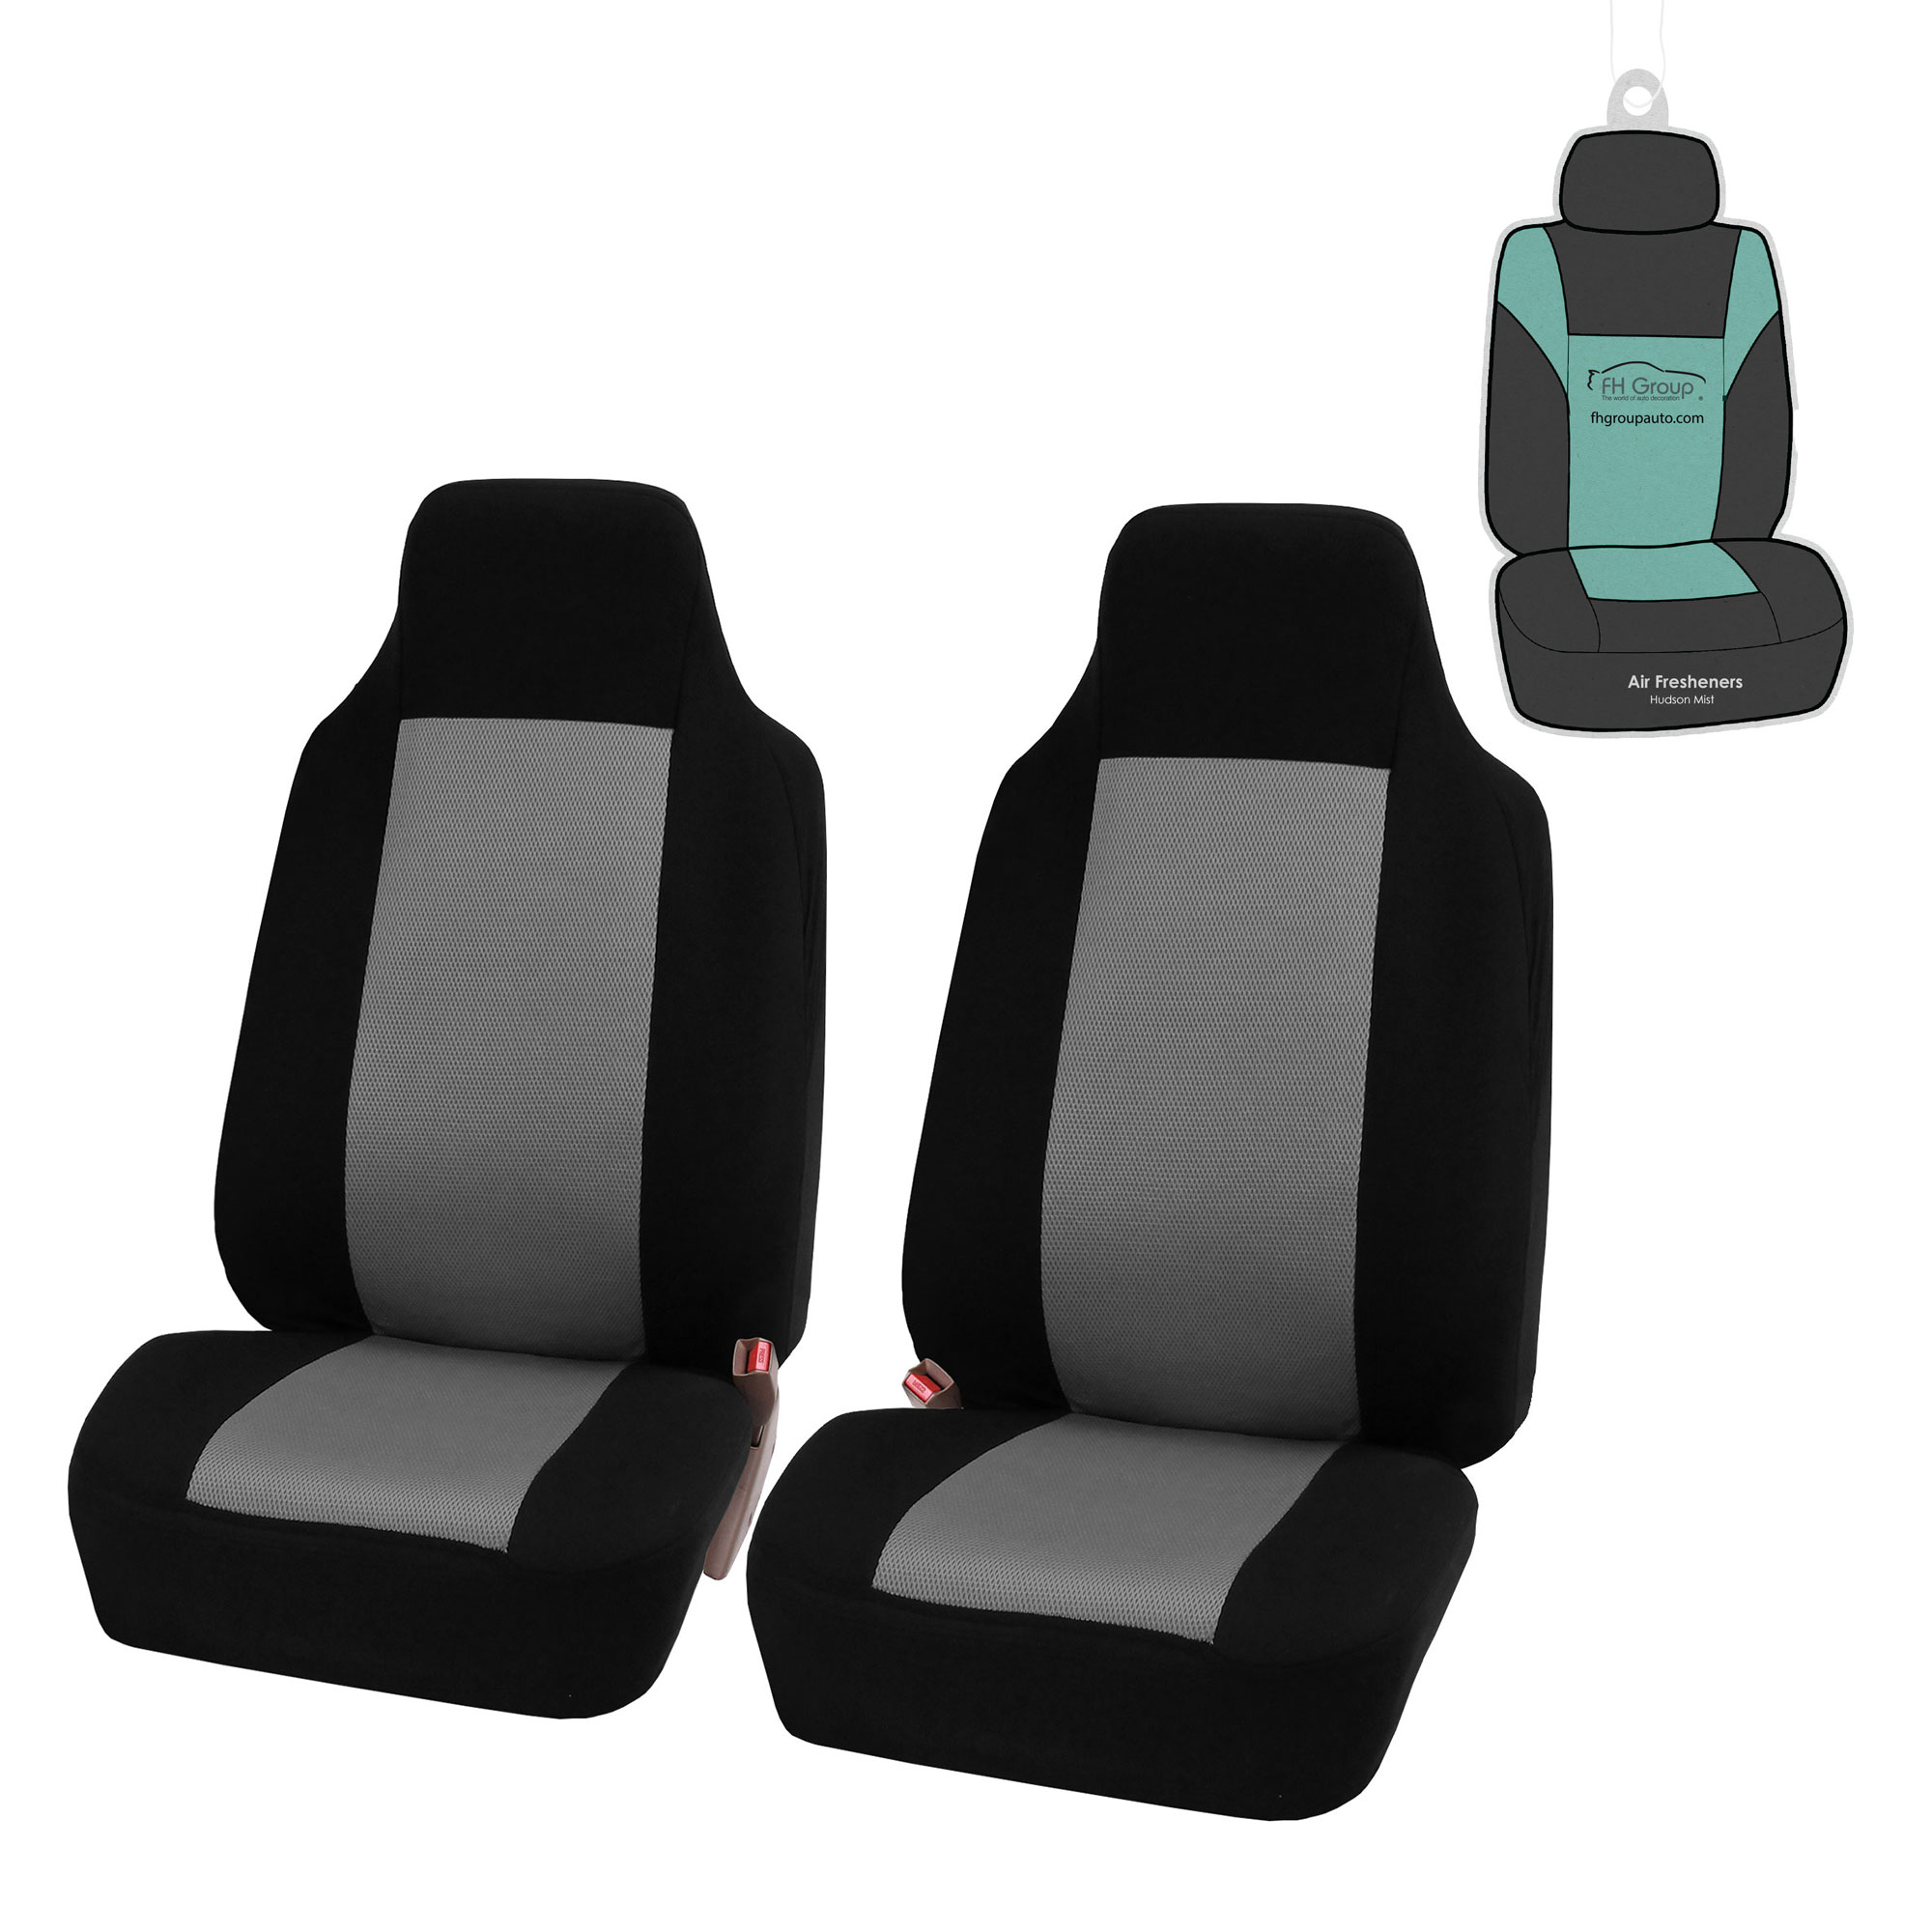 FH Group Classic Cloth Car Seat Cover, Universal Gray Front Set Seat Cover with Air Freshener - image 1 of 6